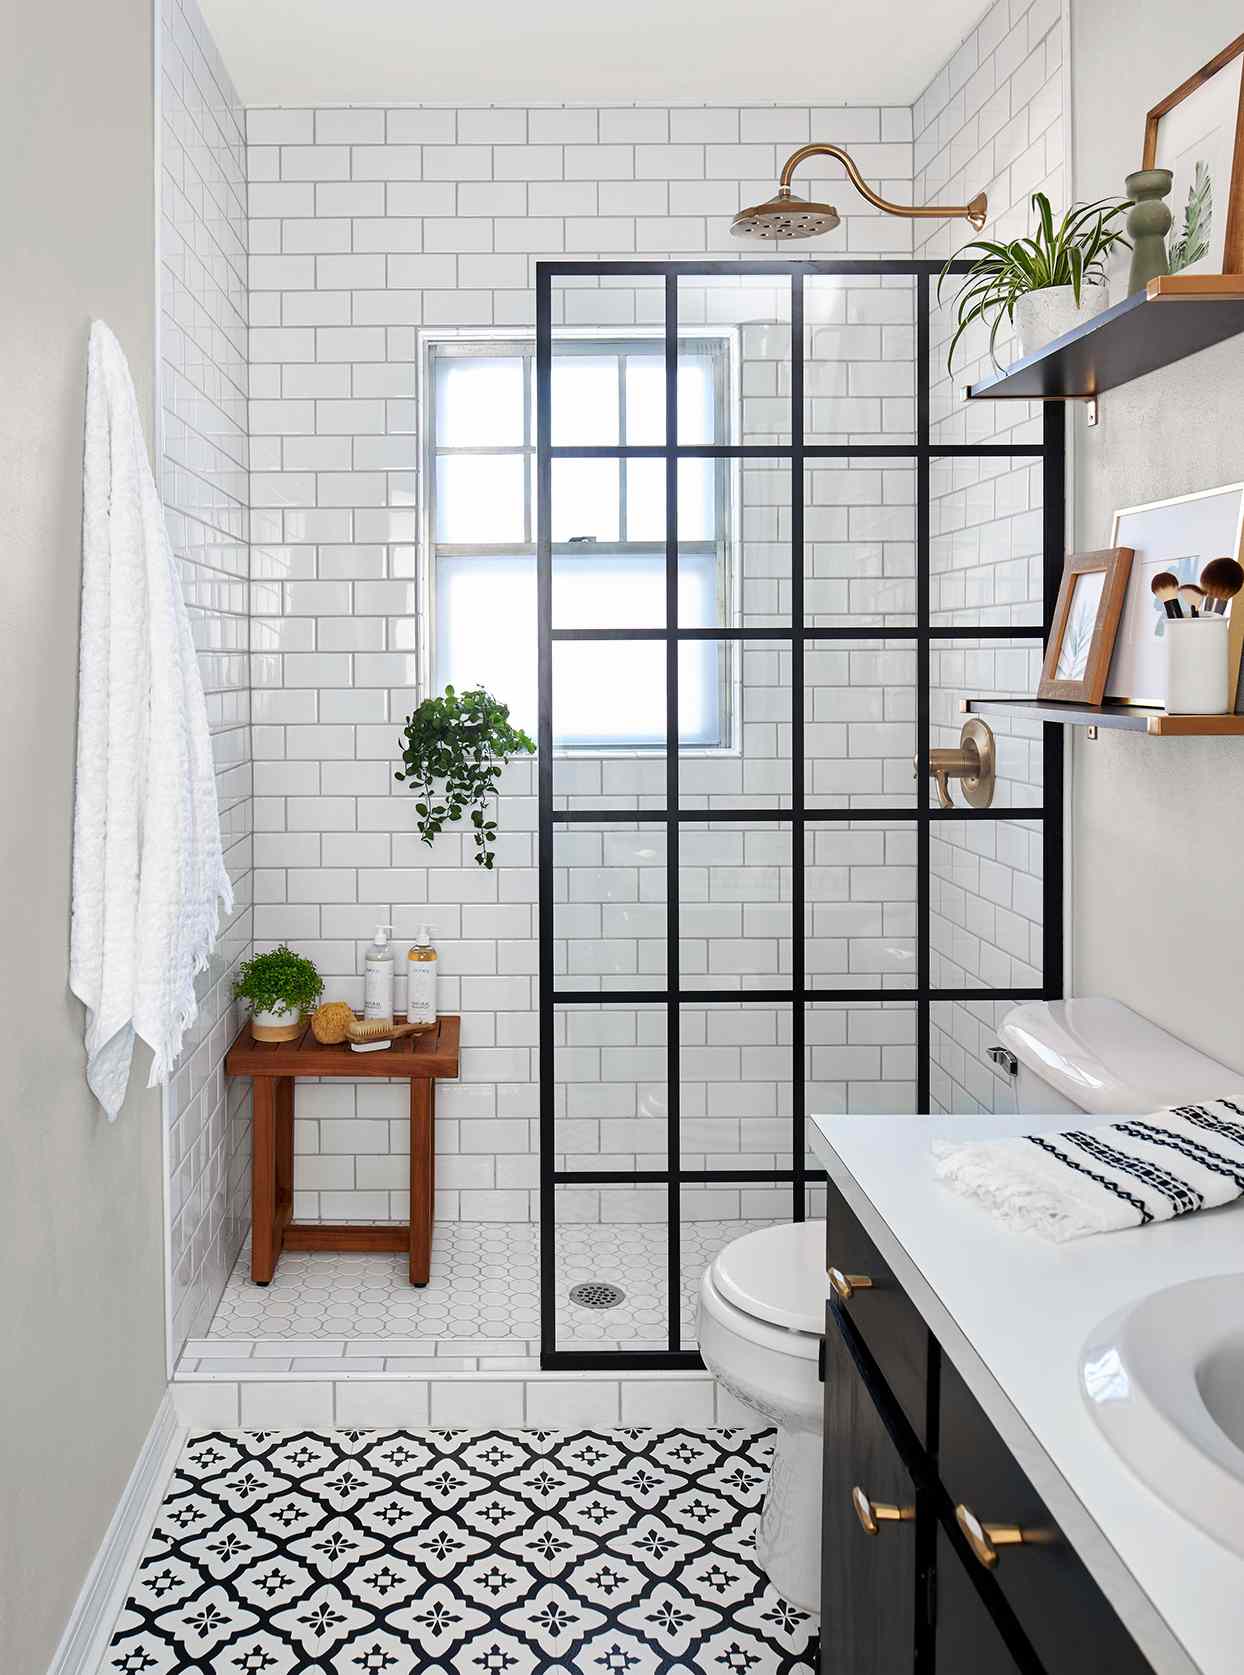 Small Bathroom Remodels, Bathroom Remodeling Ideas On A Budget